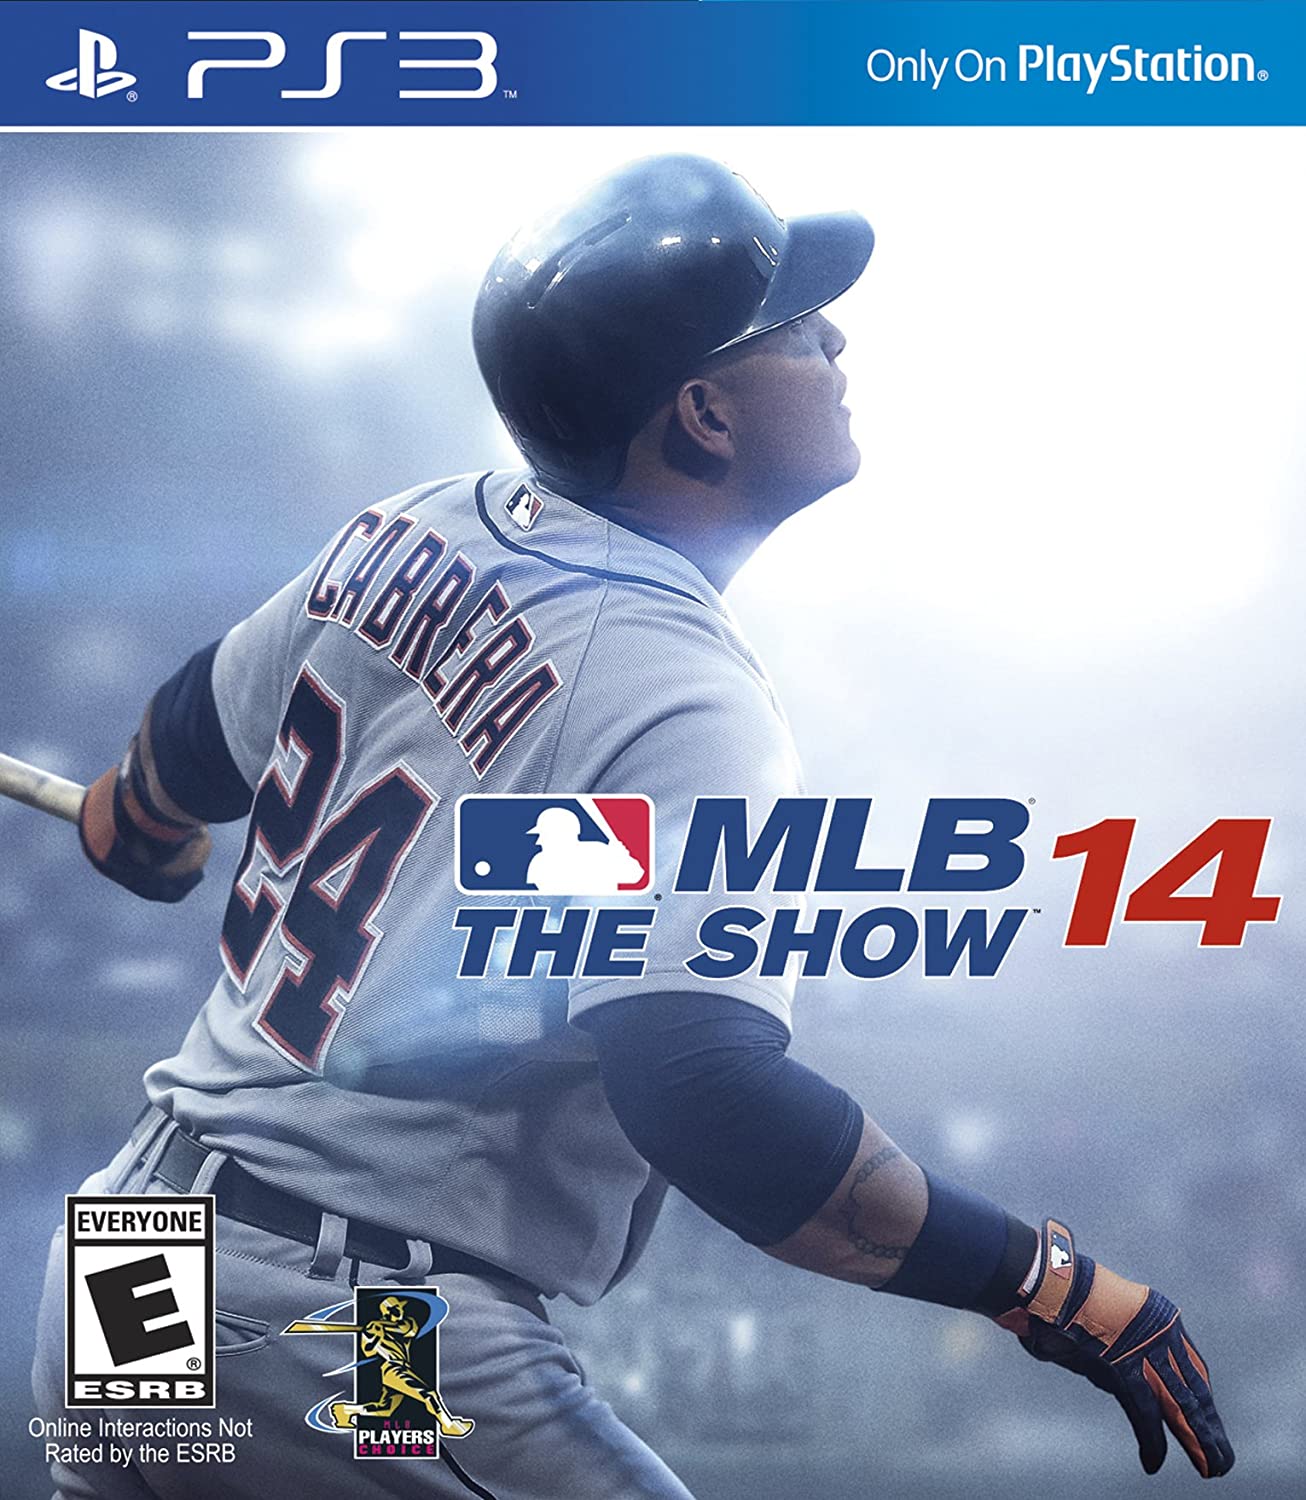 MLB 14: The Show - Darkside Records